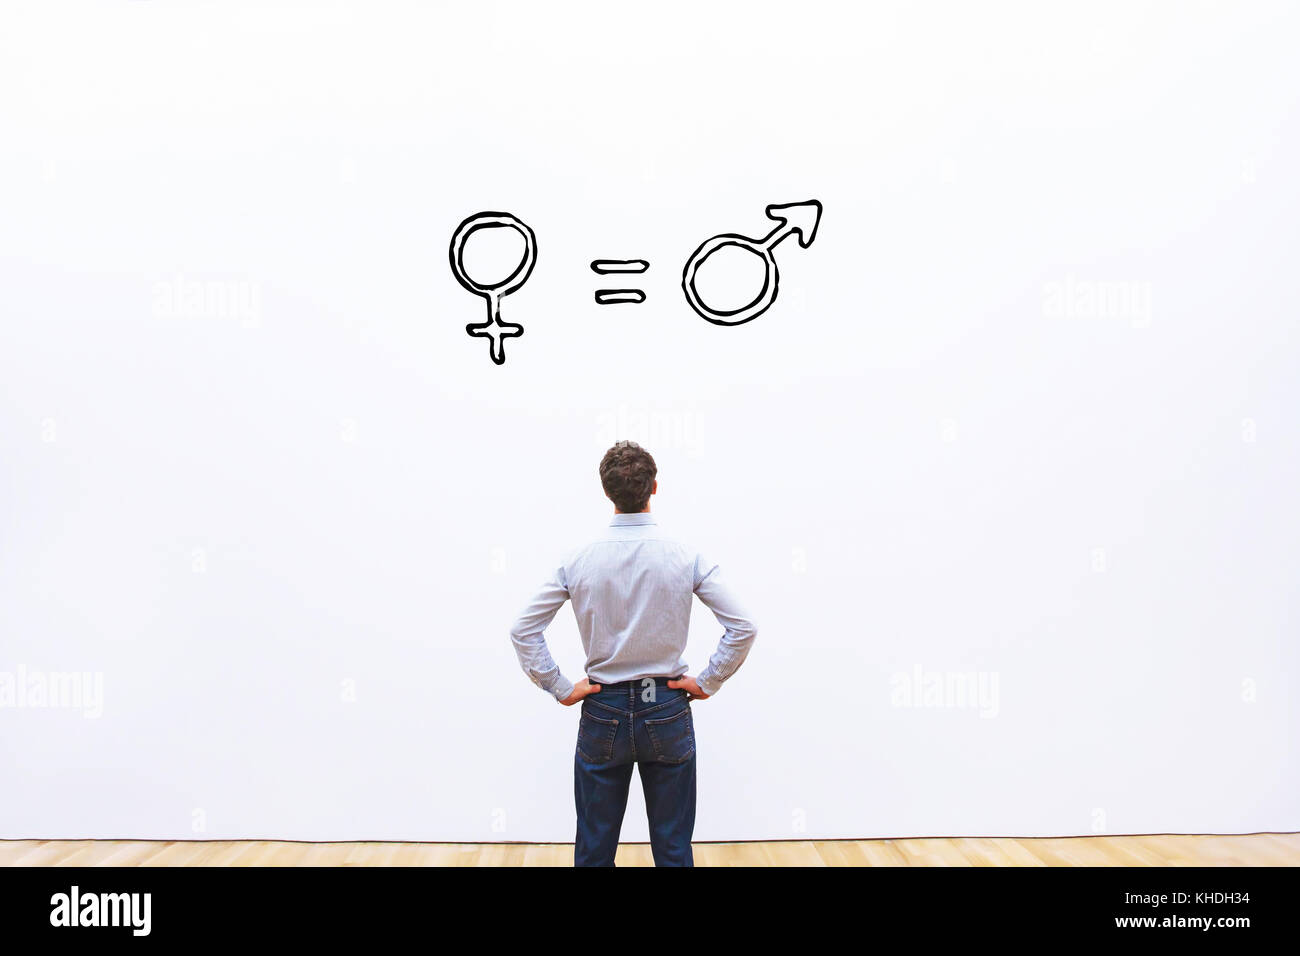 gender equality concept, man and woman are equal Stock Photo